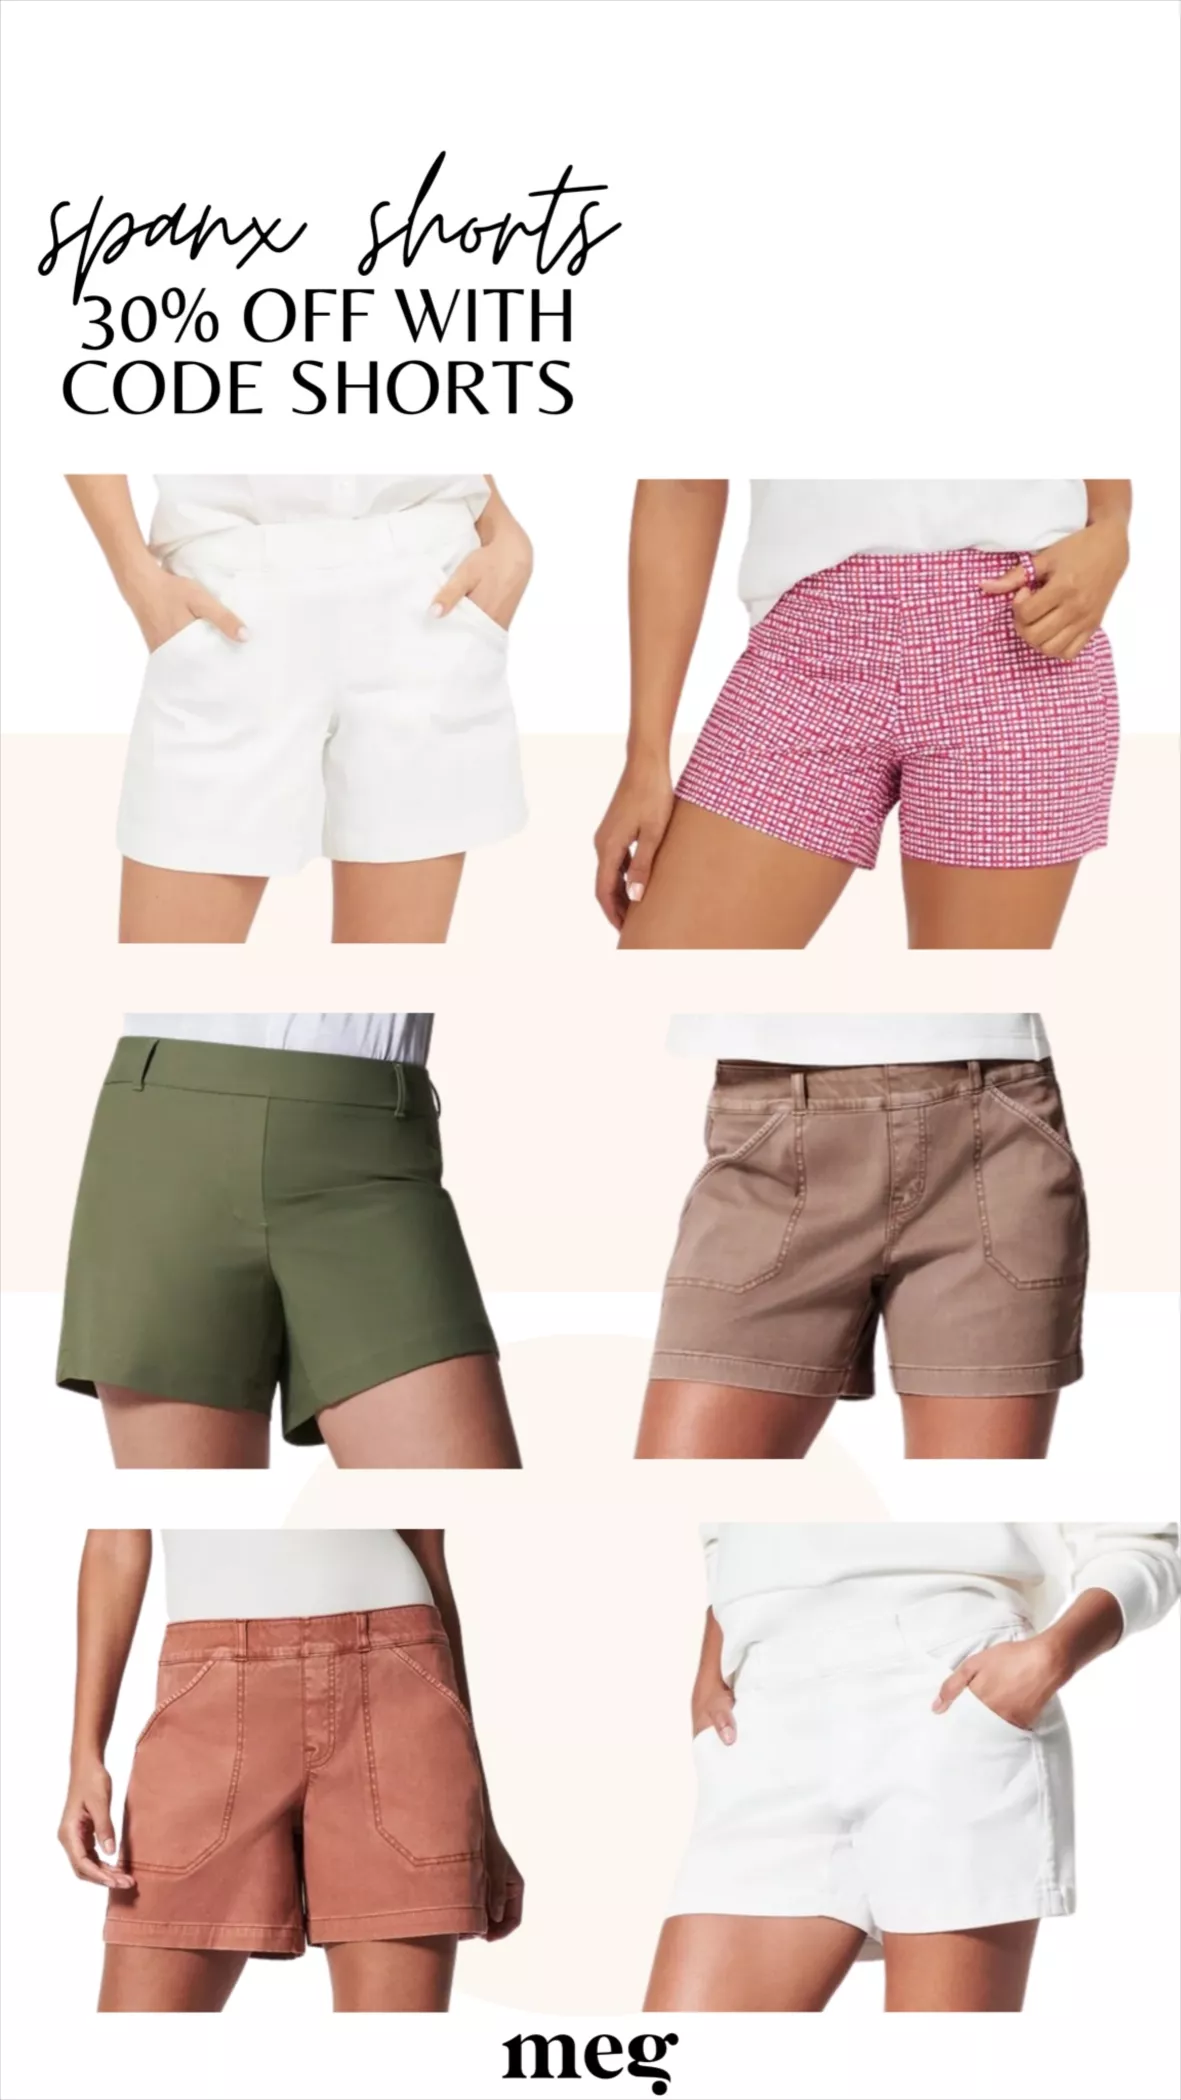 Spanx Shorts for Women